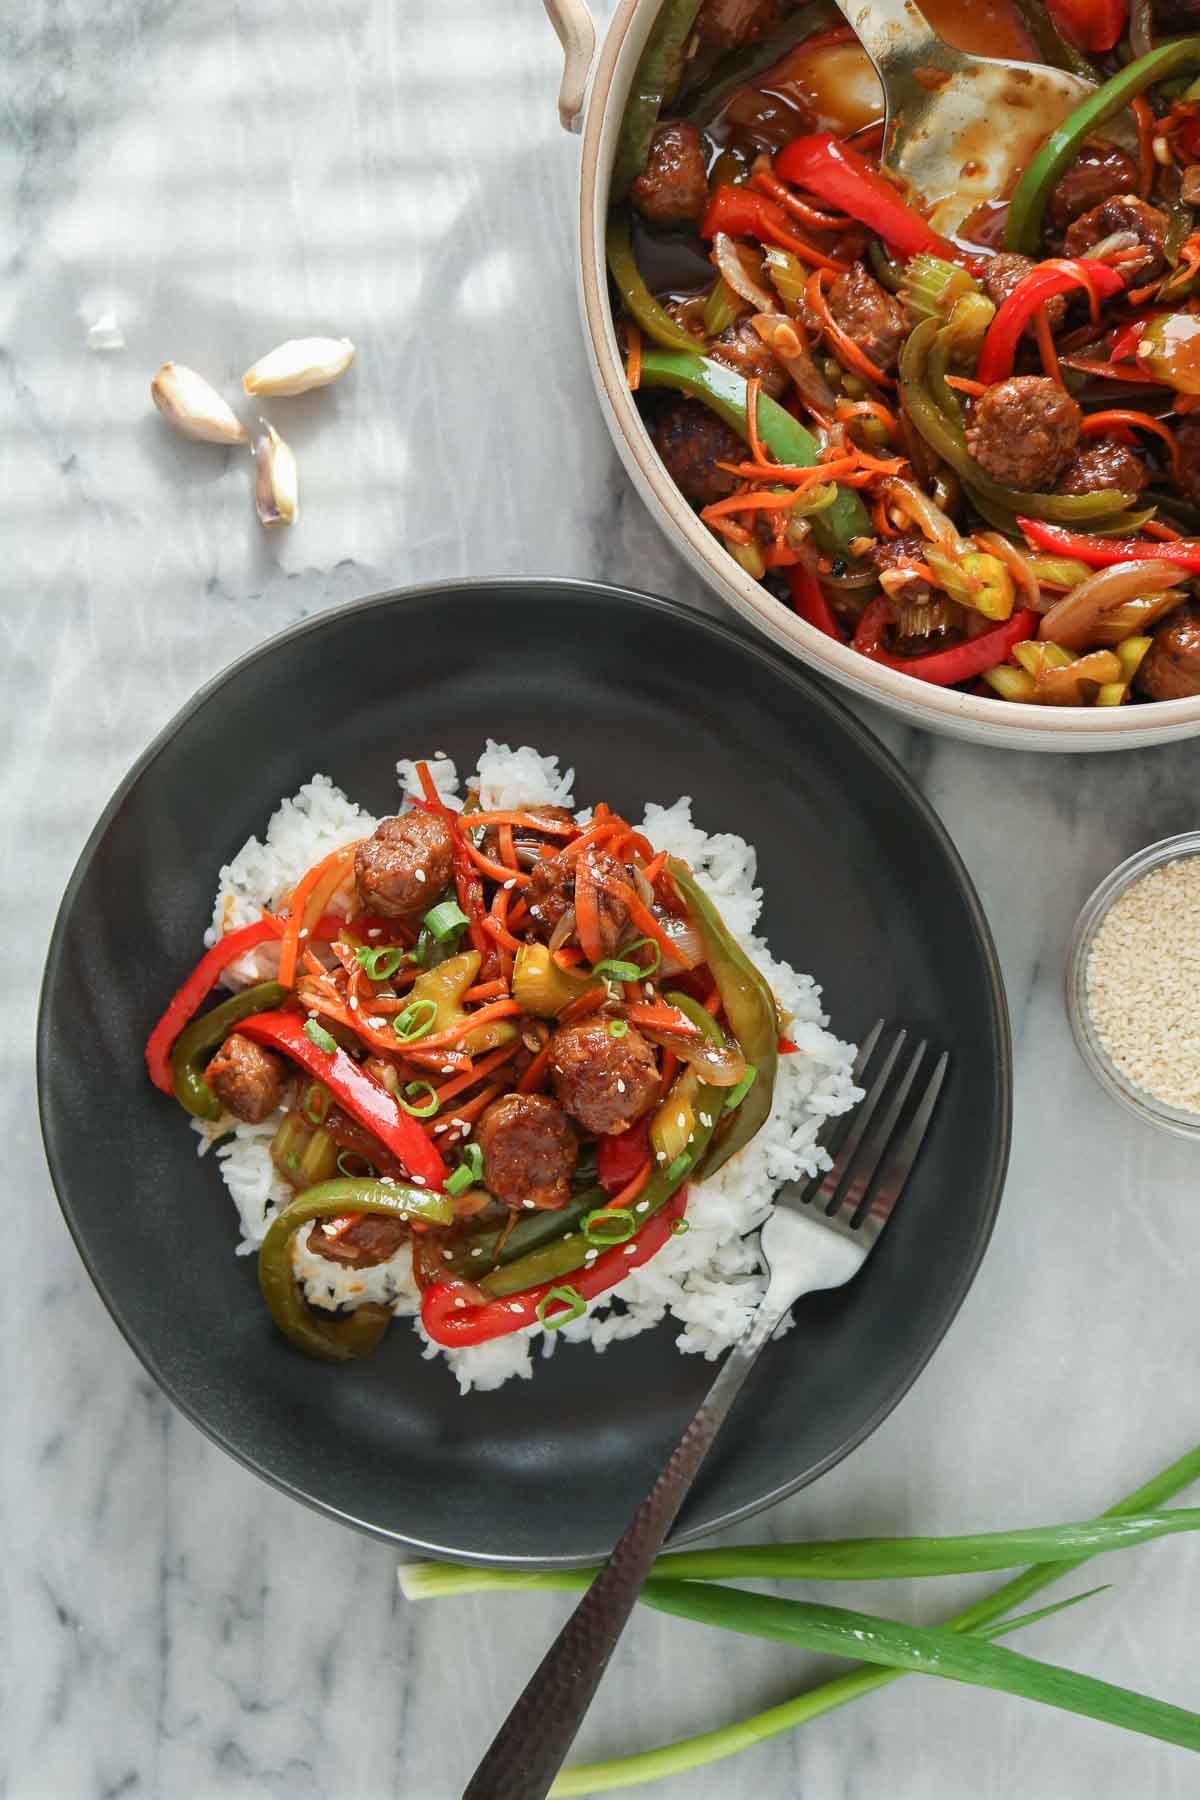 Plate of sausage stir-fry over rice alongside a serving dish of stir-fry.